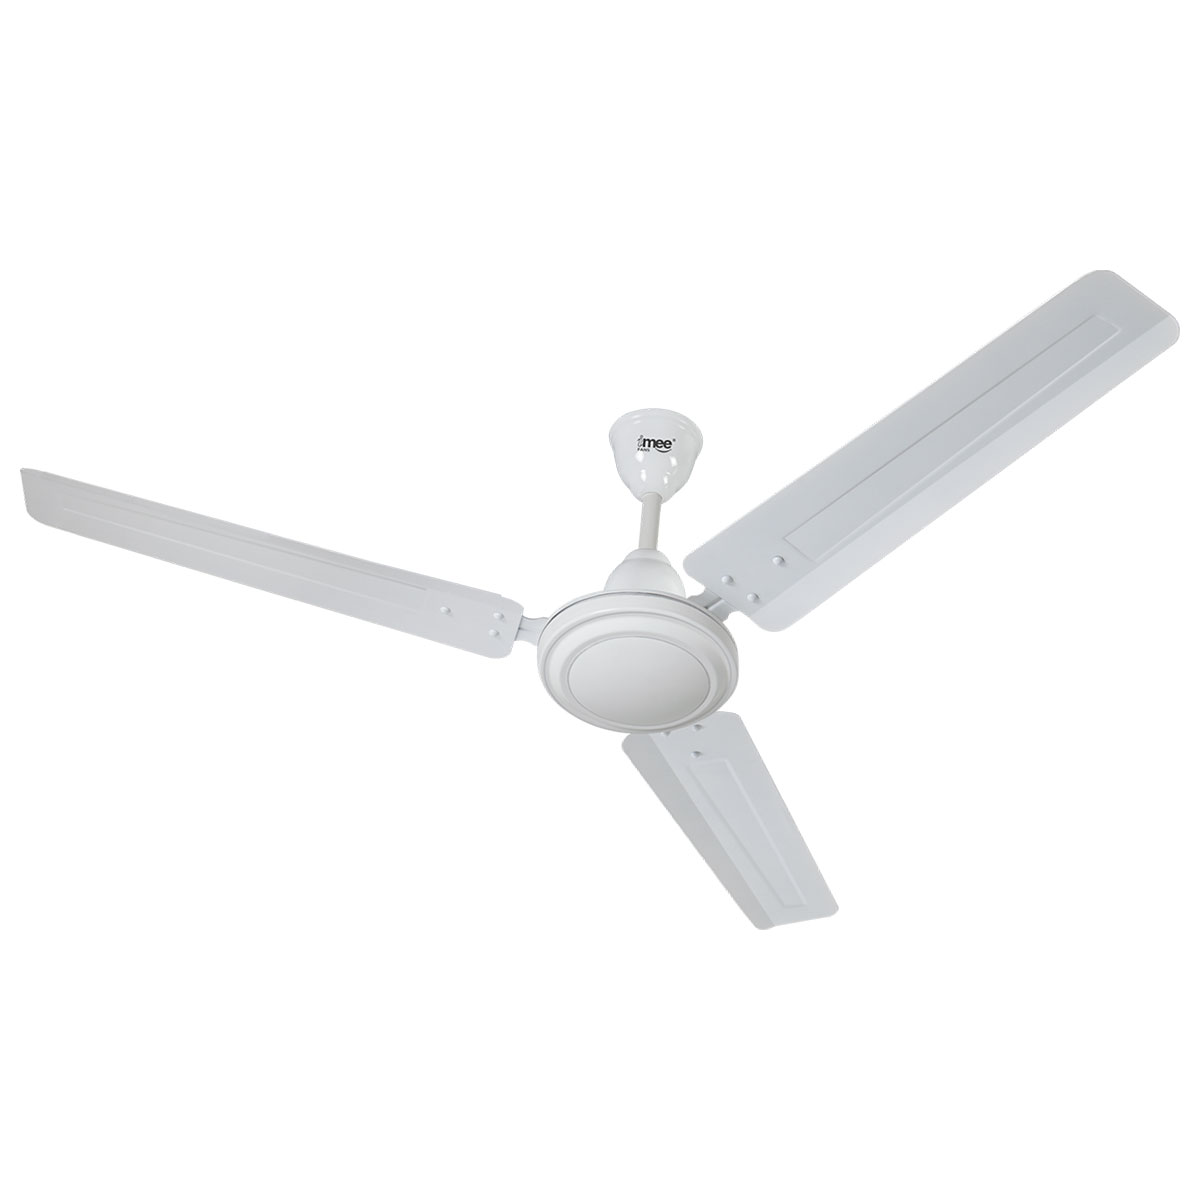 High Speed Ceiling Fan Online       / GoPro High Speed Ceiling fan - YouTube / It is designed to work even under low voltage conditions and maximize air circulation.